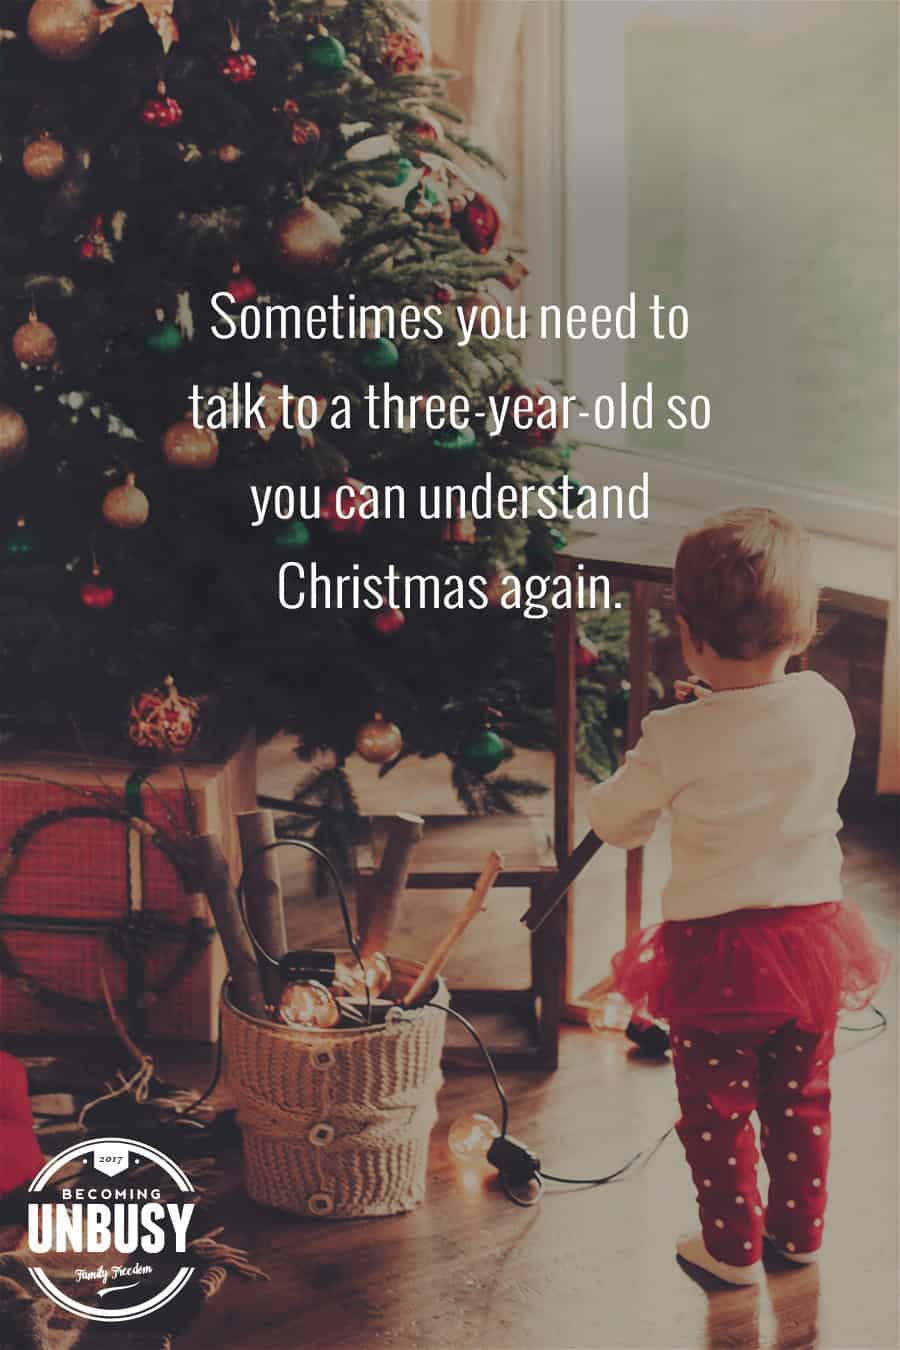 Sometimes you need to talk to to a three-year-old so you can understand Christmas again. #quote #BecomingUnBusy #Christmas *Love this post and site!